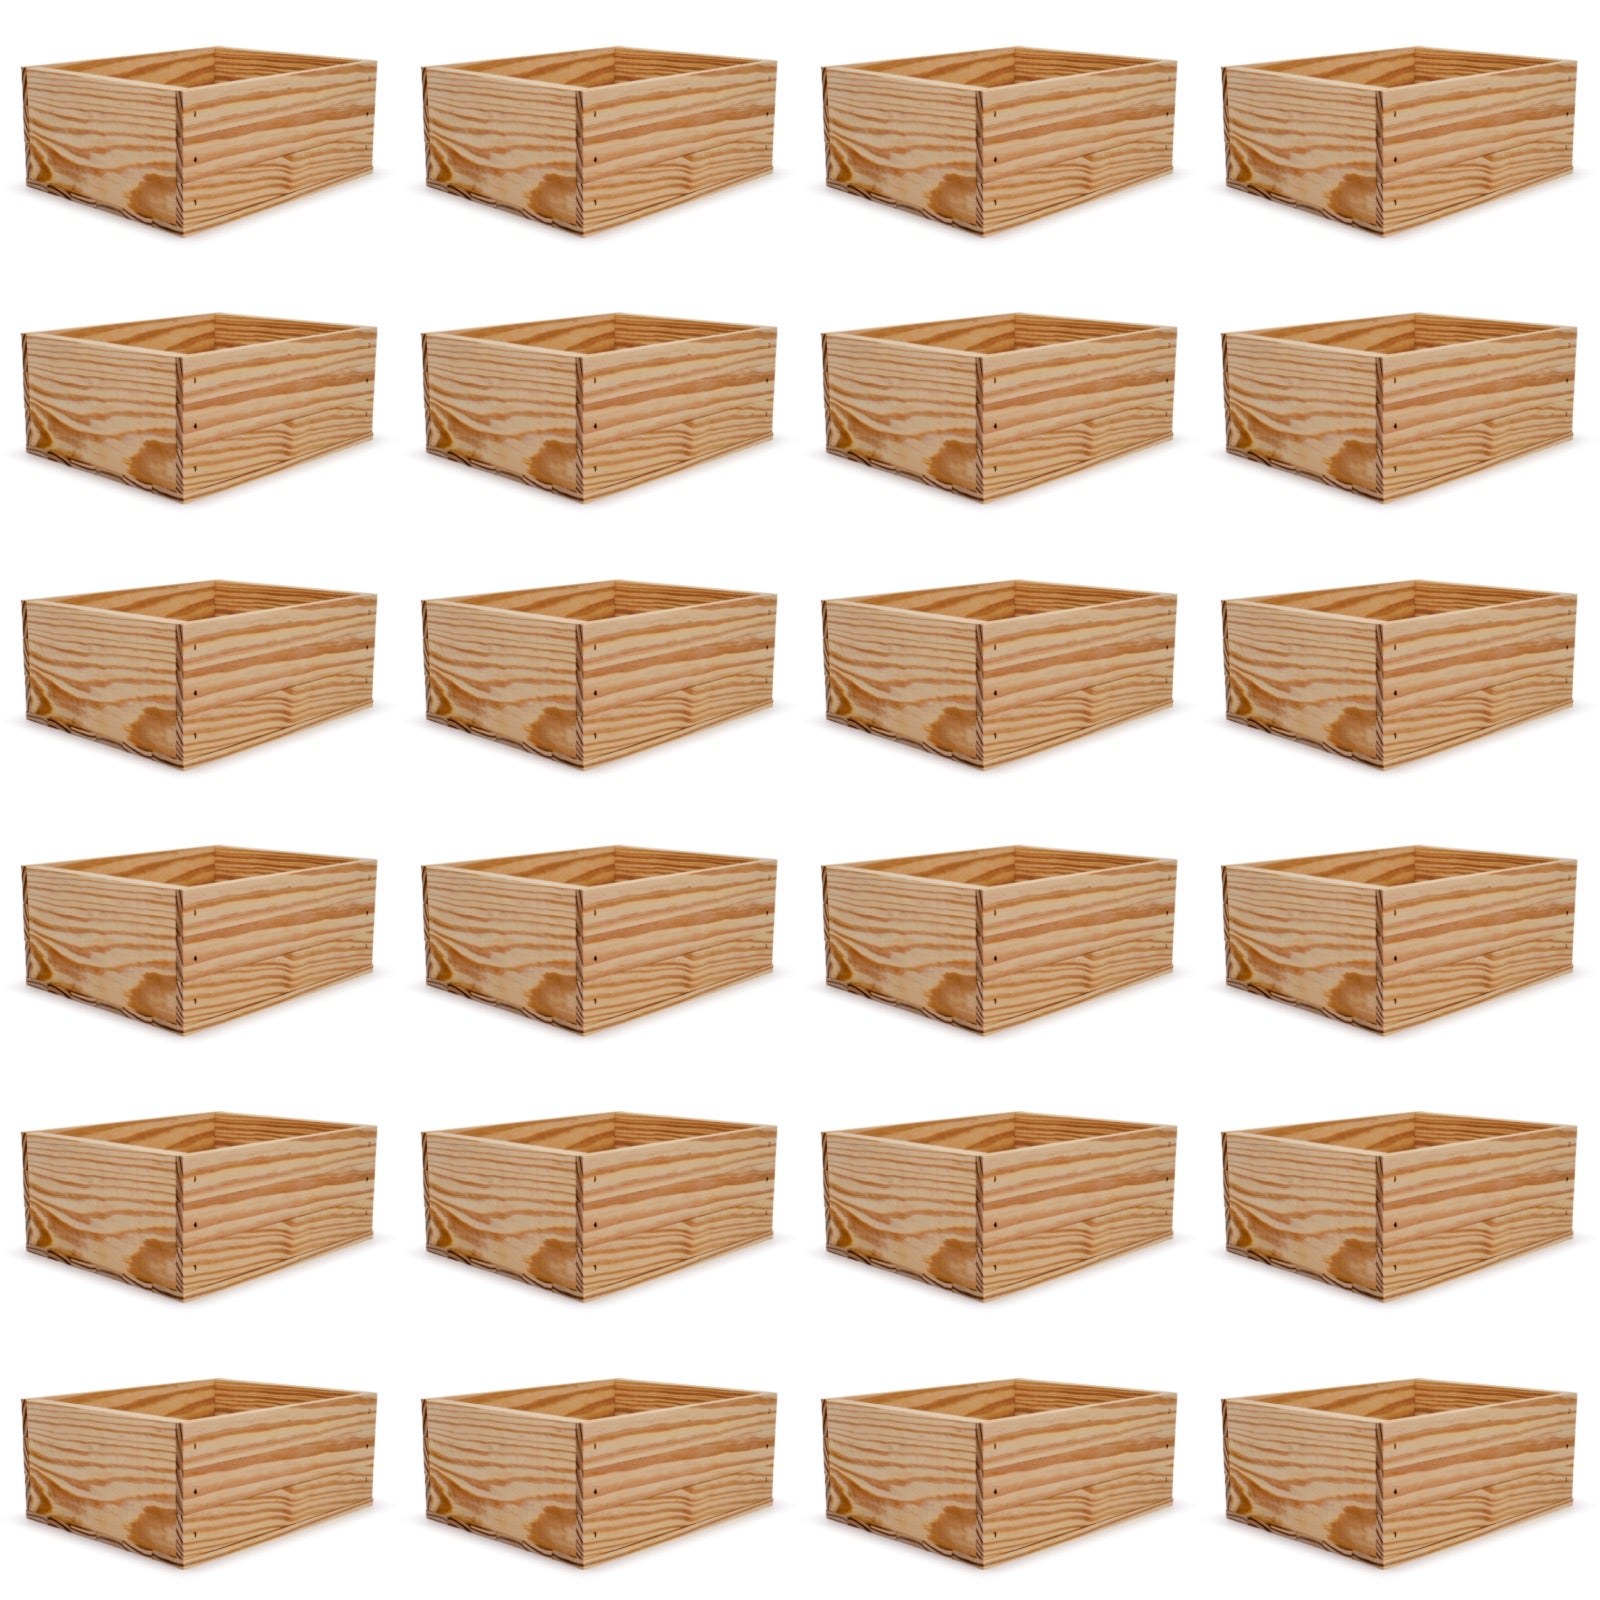 24 Small wooden crates 12x9.75x5.25